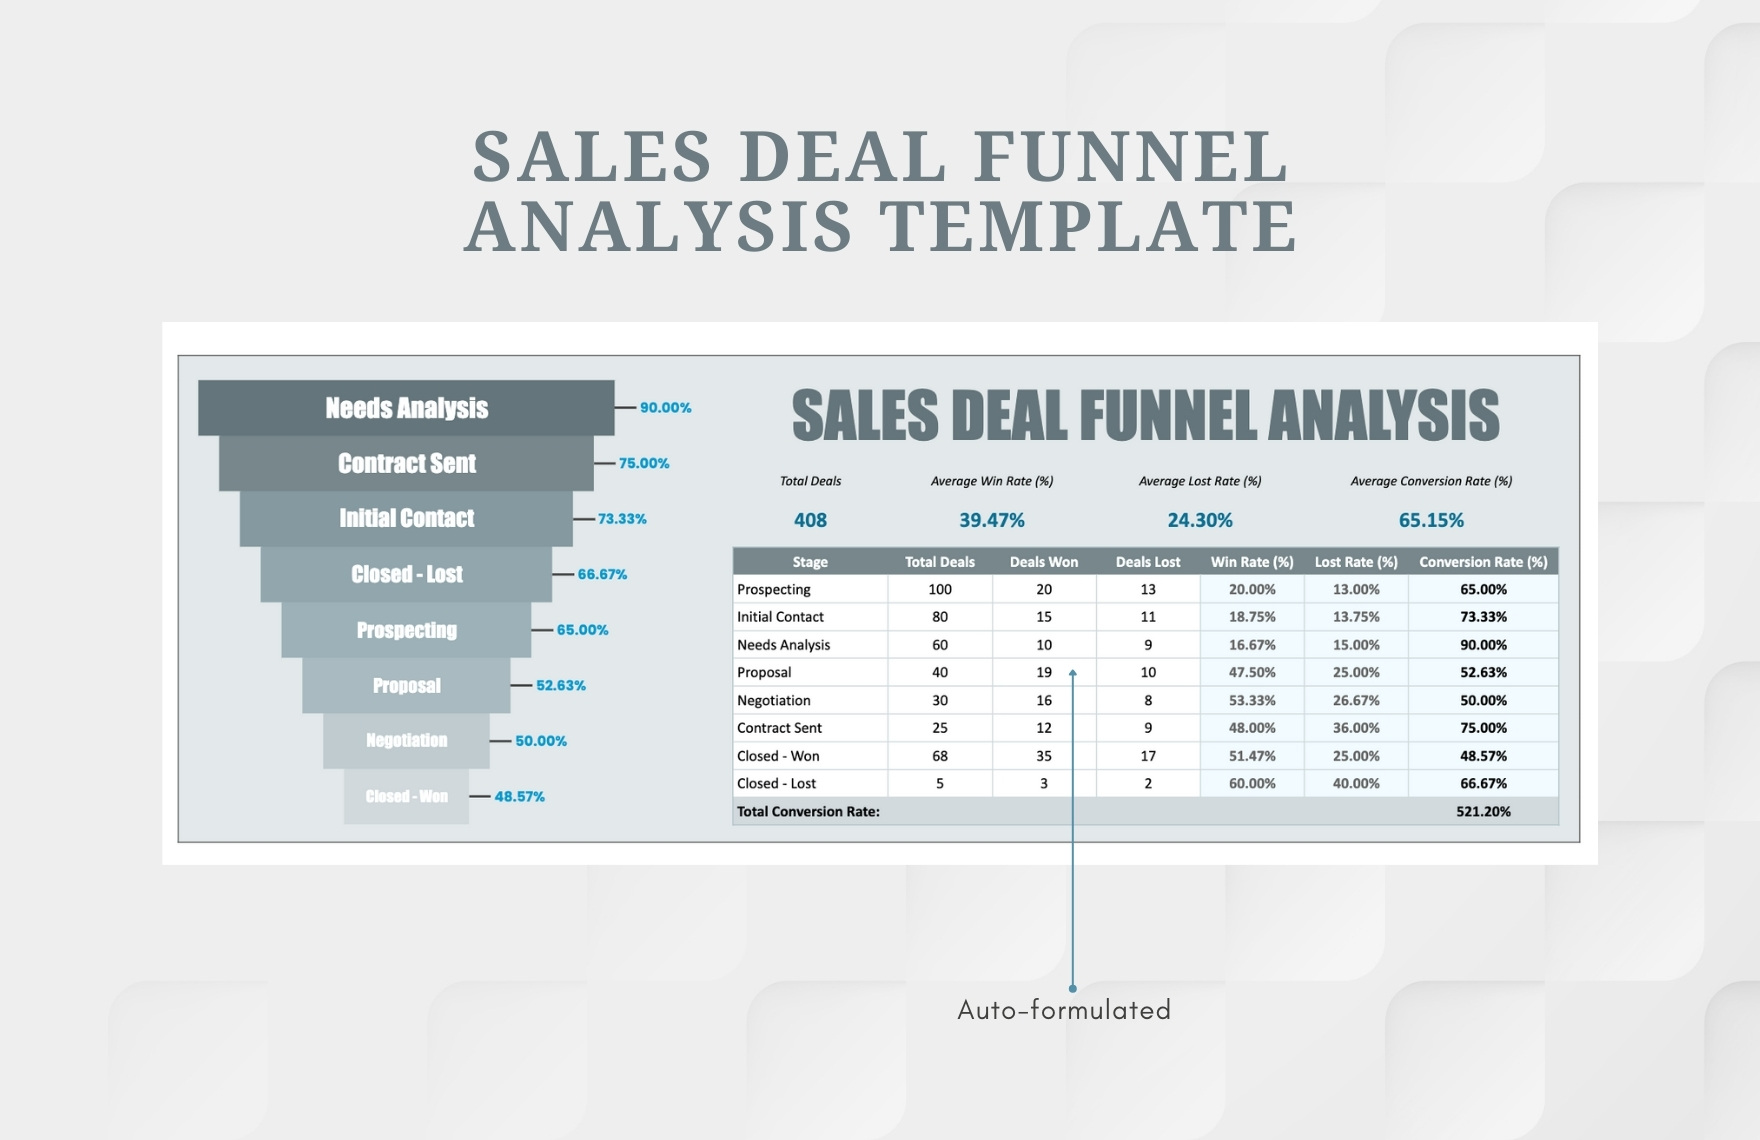 Sales Deal Funnel Analysis Template